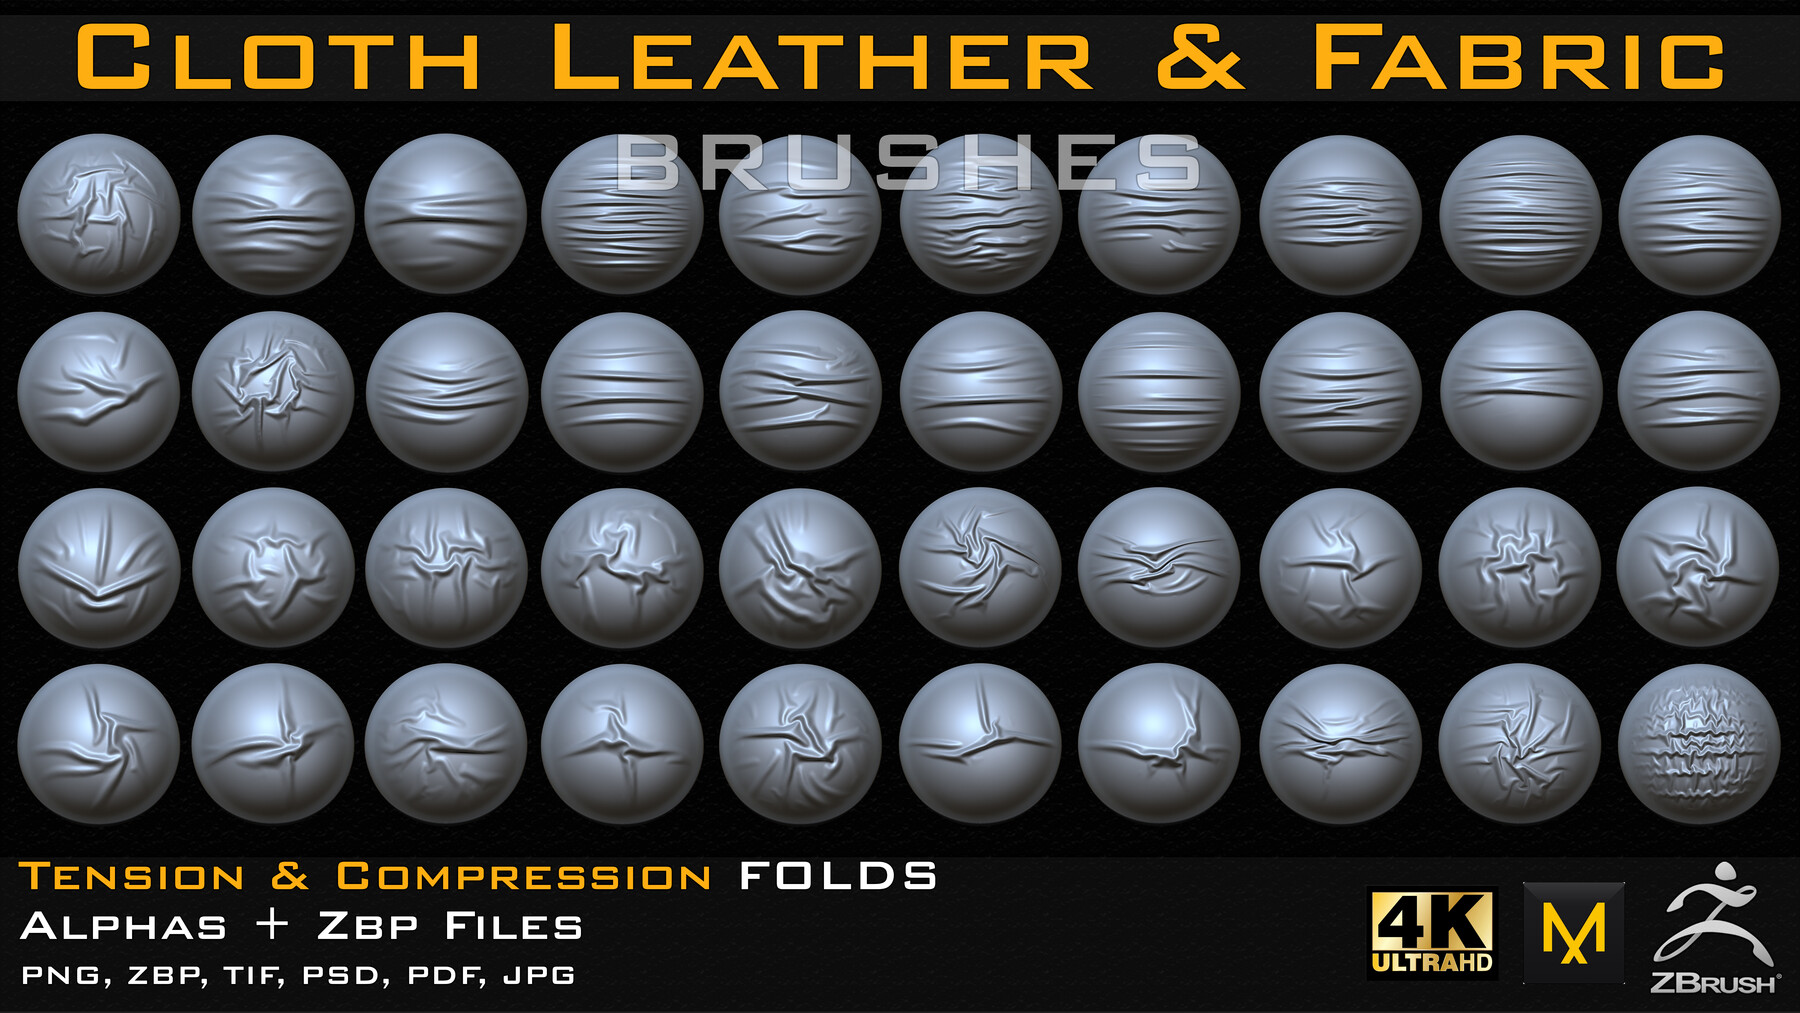 ArtStation - 70 cloth Leather & Fabric Brushes (4k) Tension & Compression  Folds + Alpha ( Vol.05 )